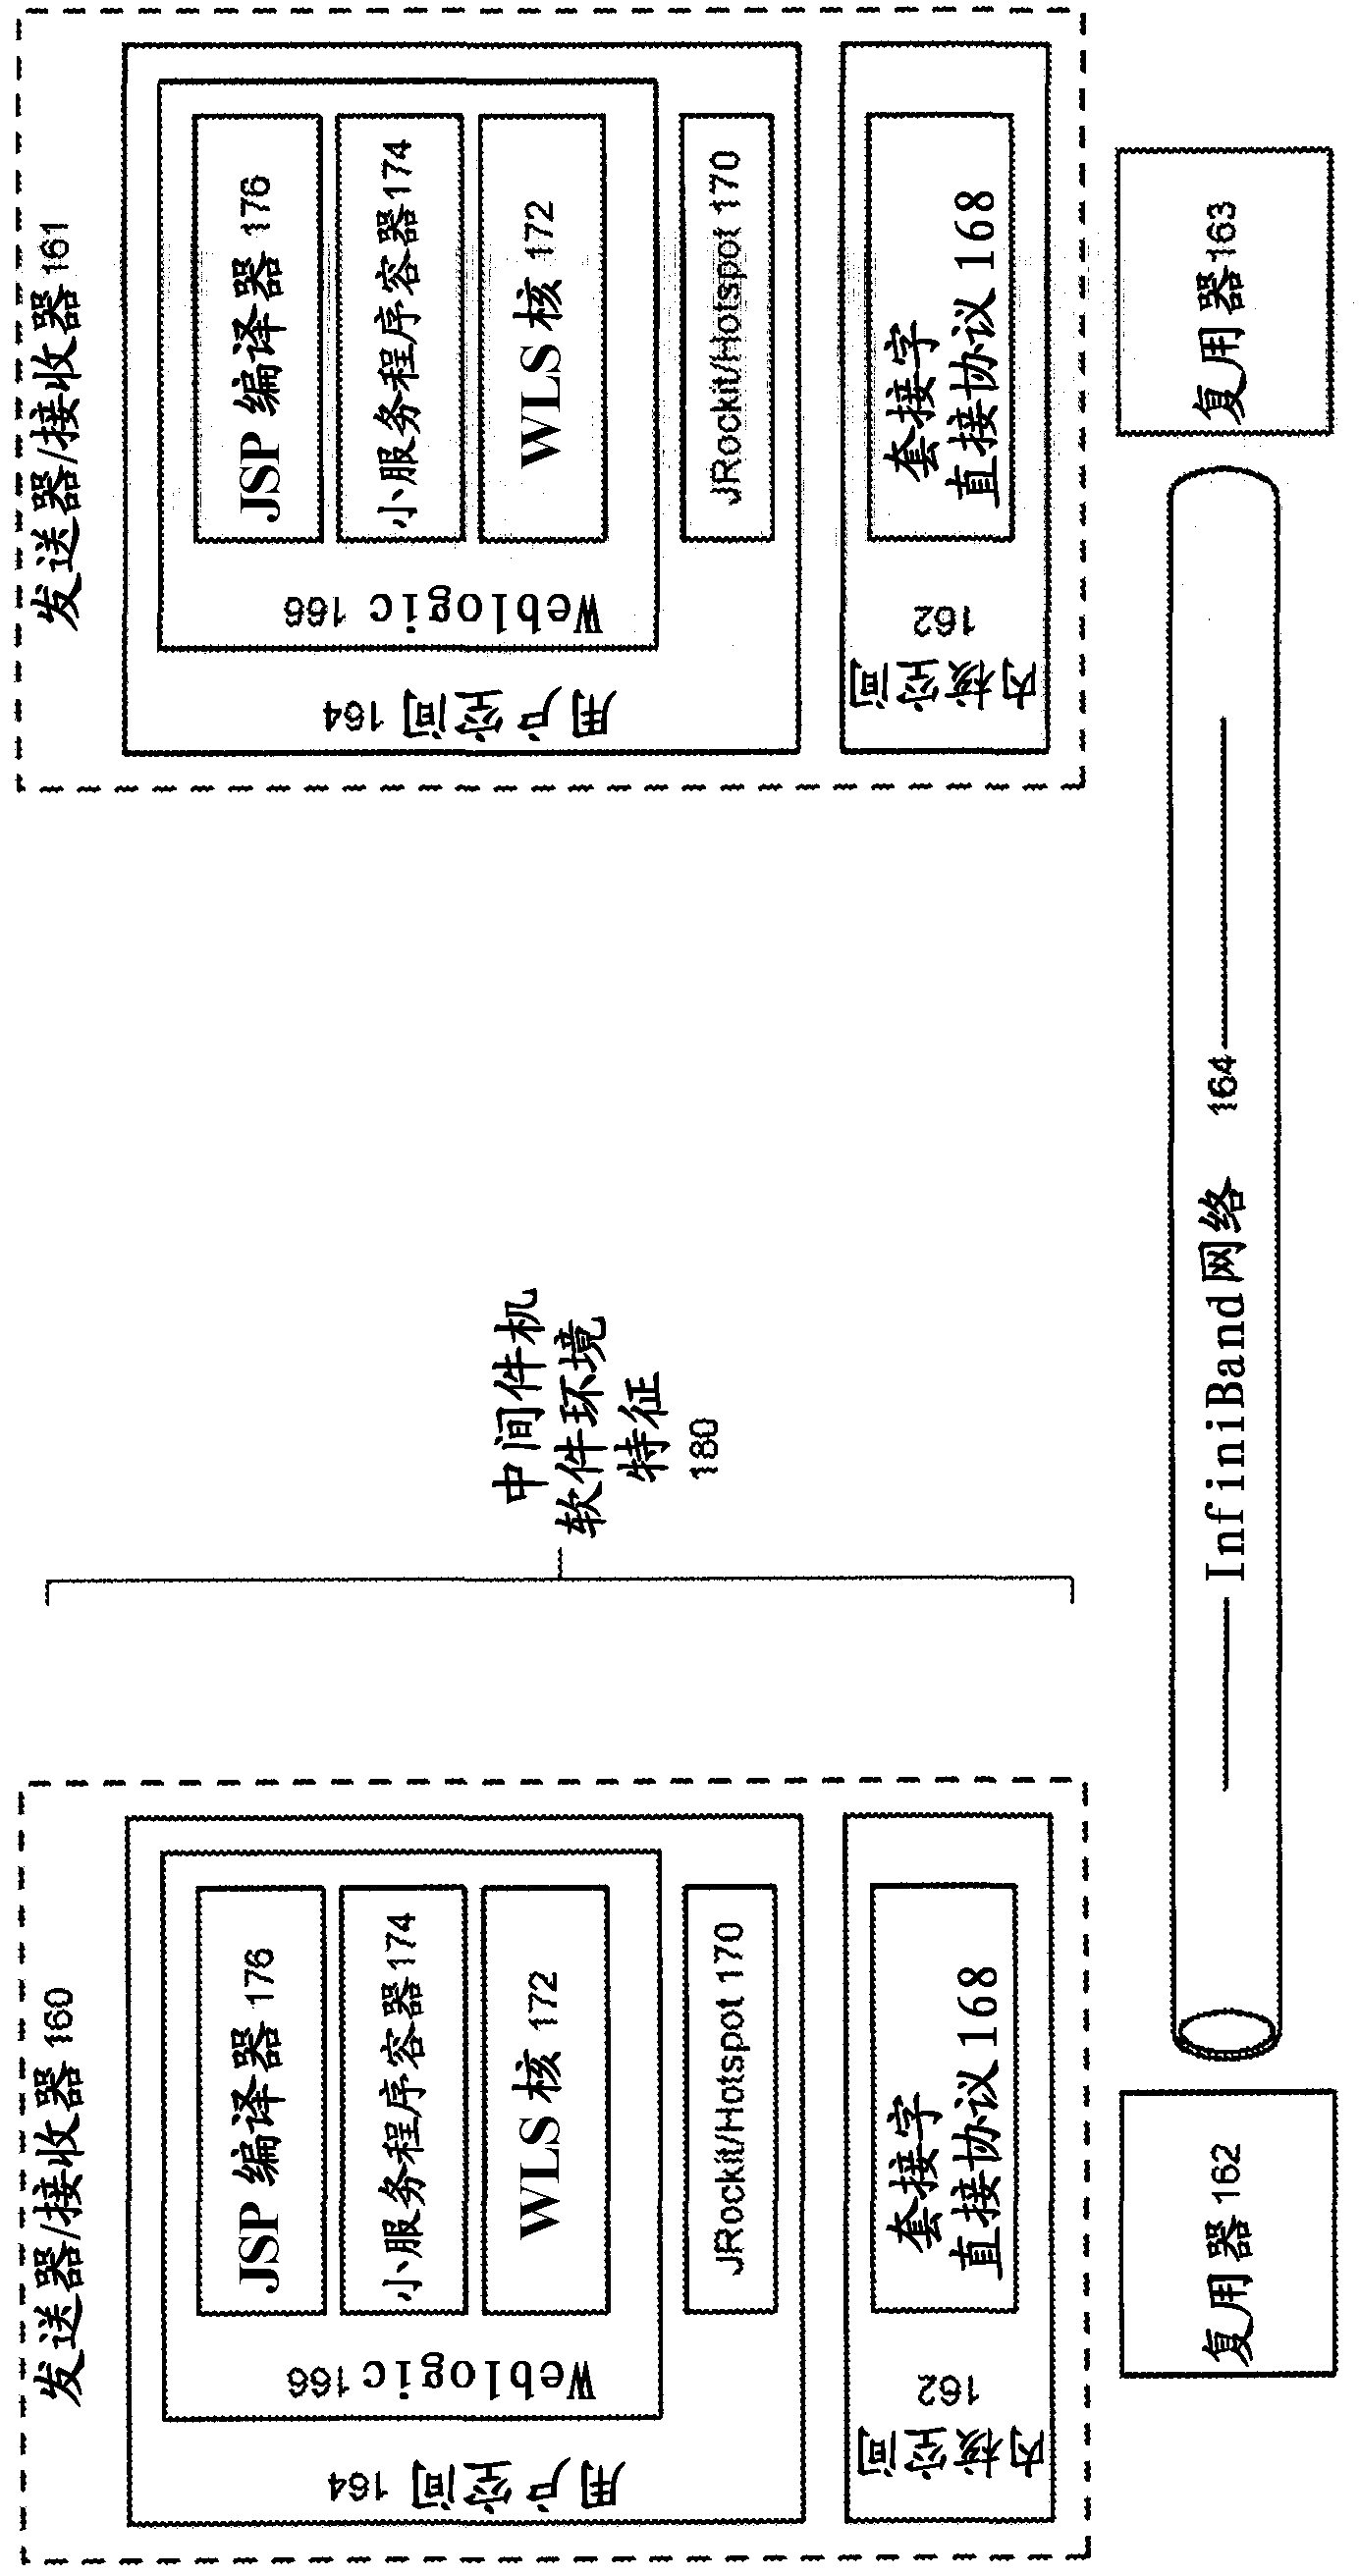 System including a middleware machine environment